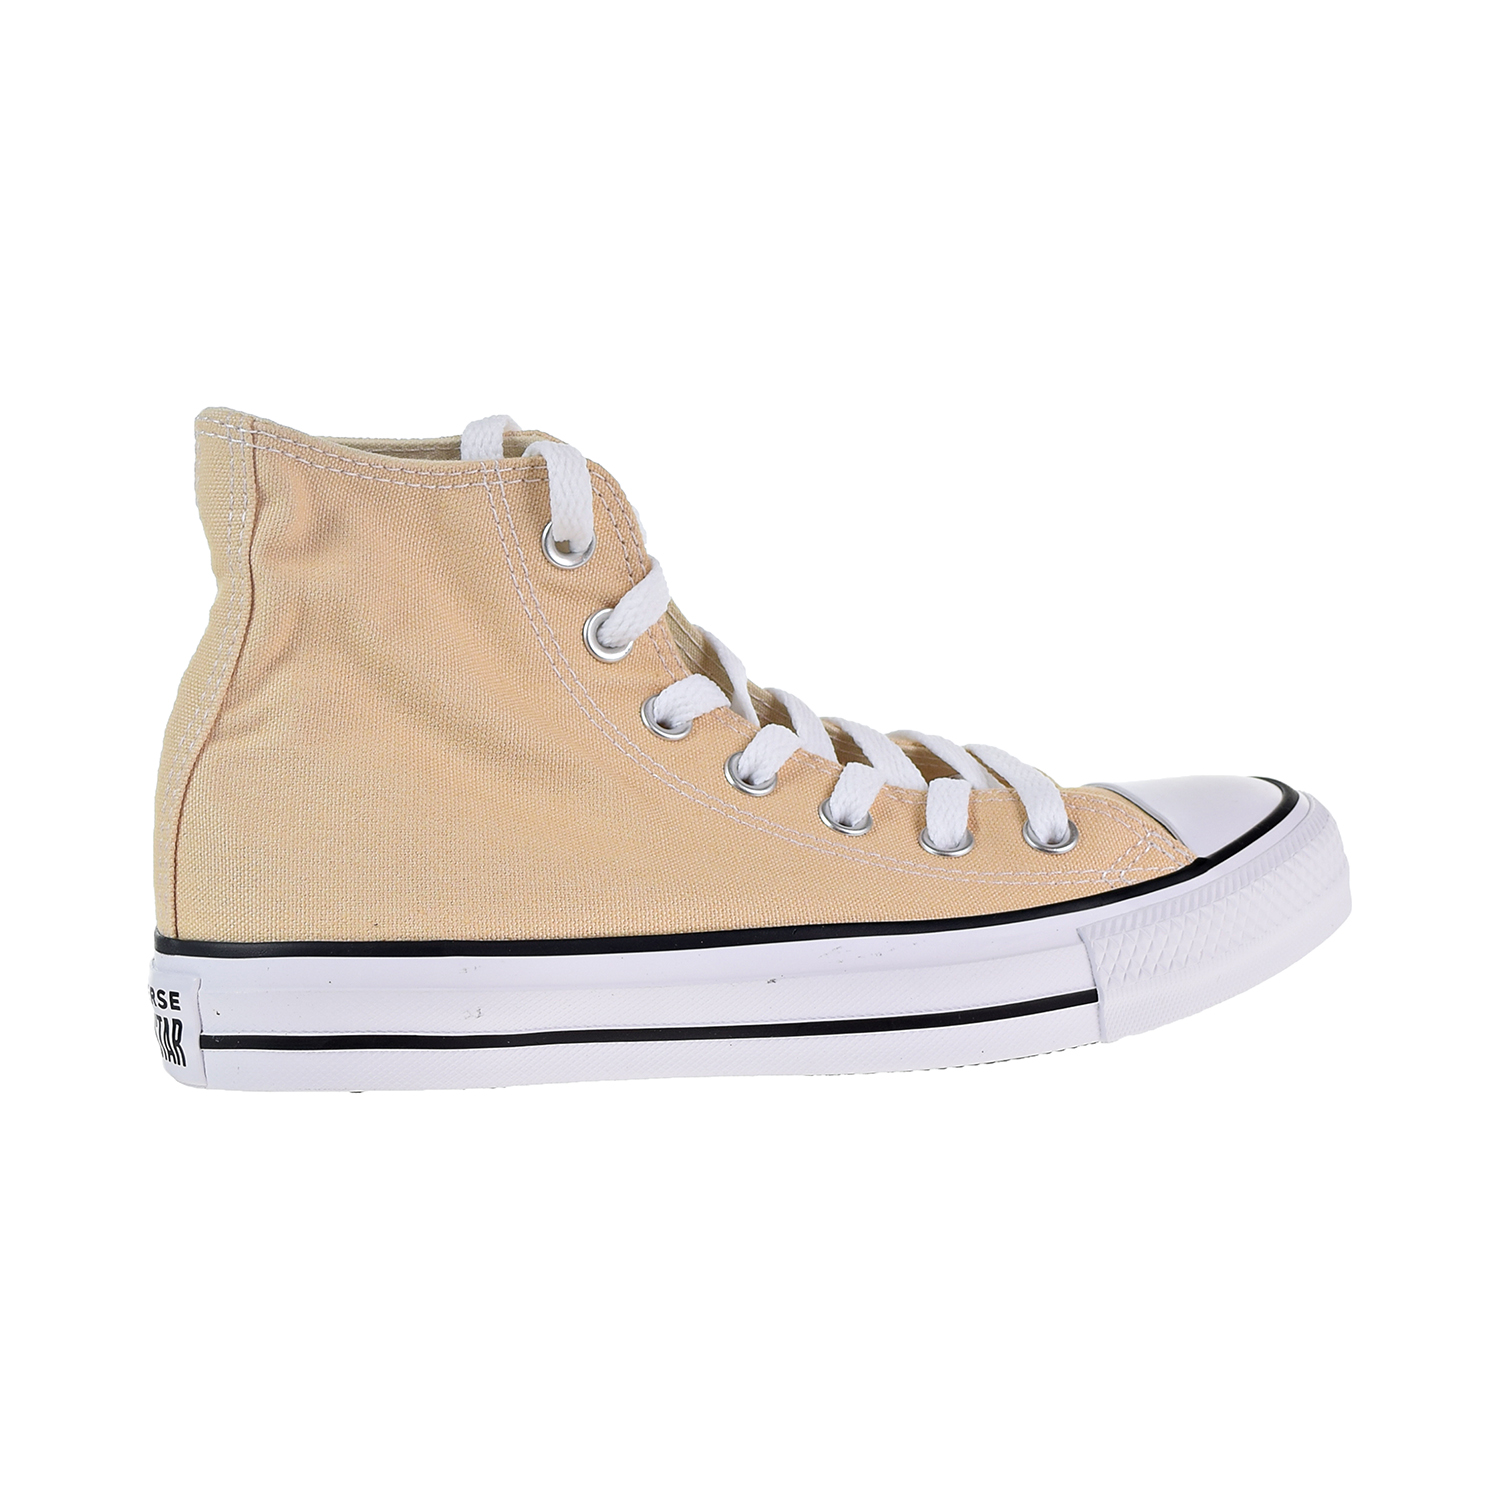 Converse Chuck Taylor All Star Hi Men's/Big Kids' Shoes Raw Ginger 160456f - image 1 of 6